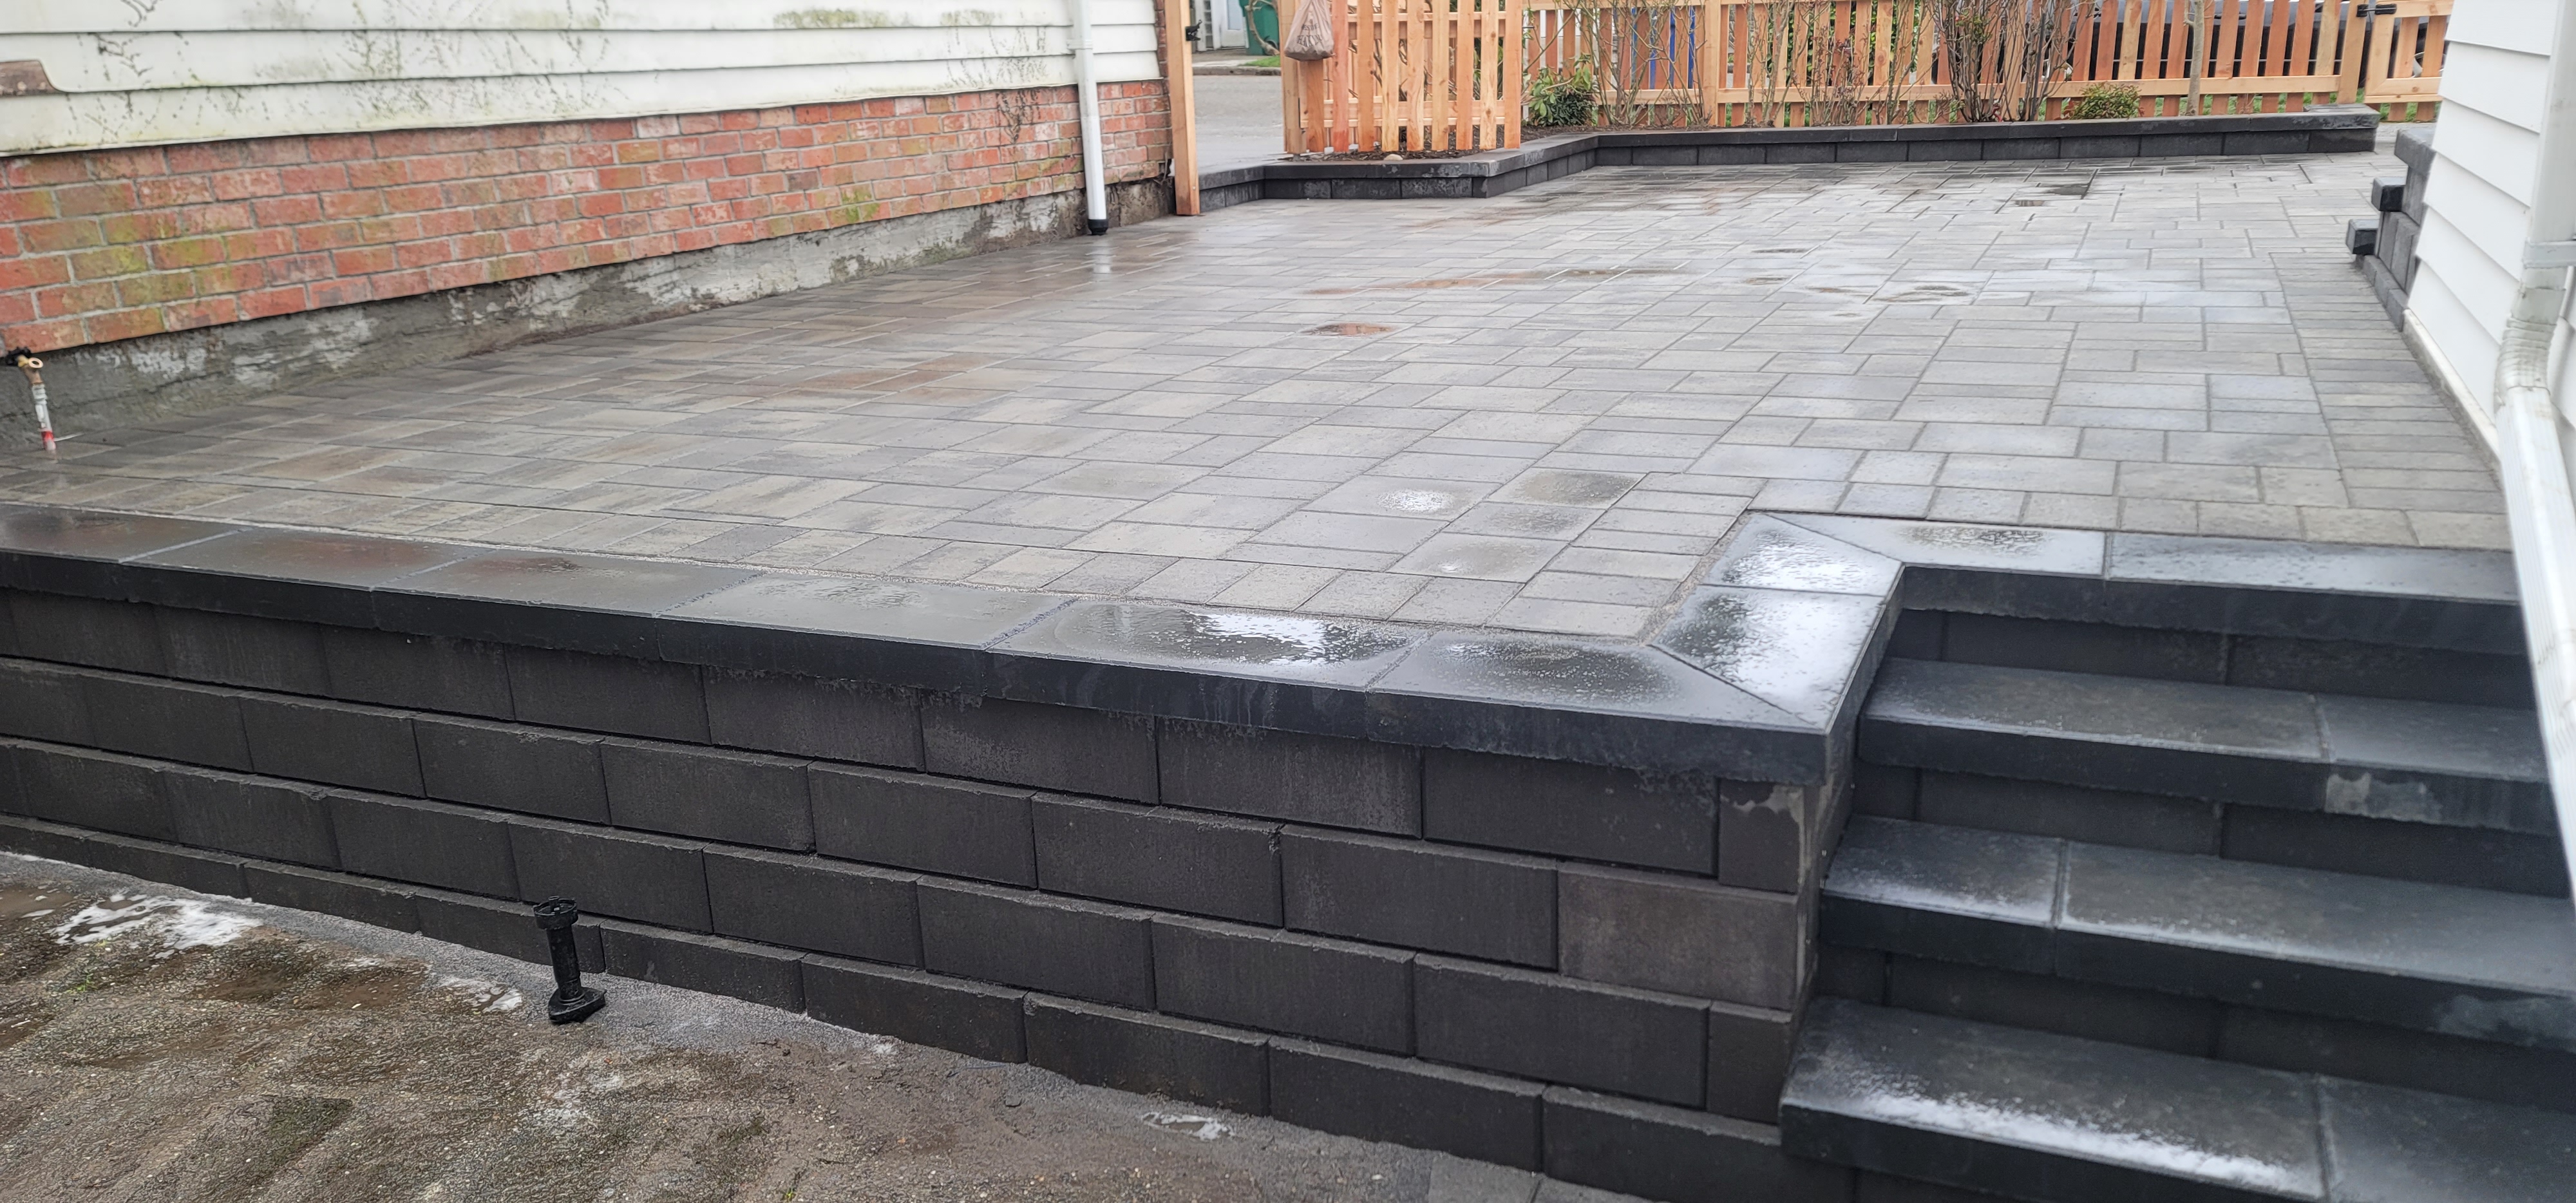 RETAINING WALL WITH MANORSTONE BLOCKS WITH SMOOTH FACE CHARCOAL.